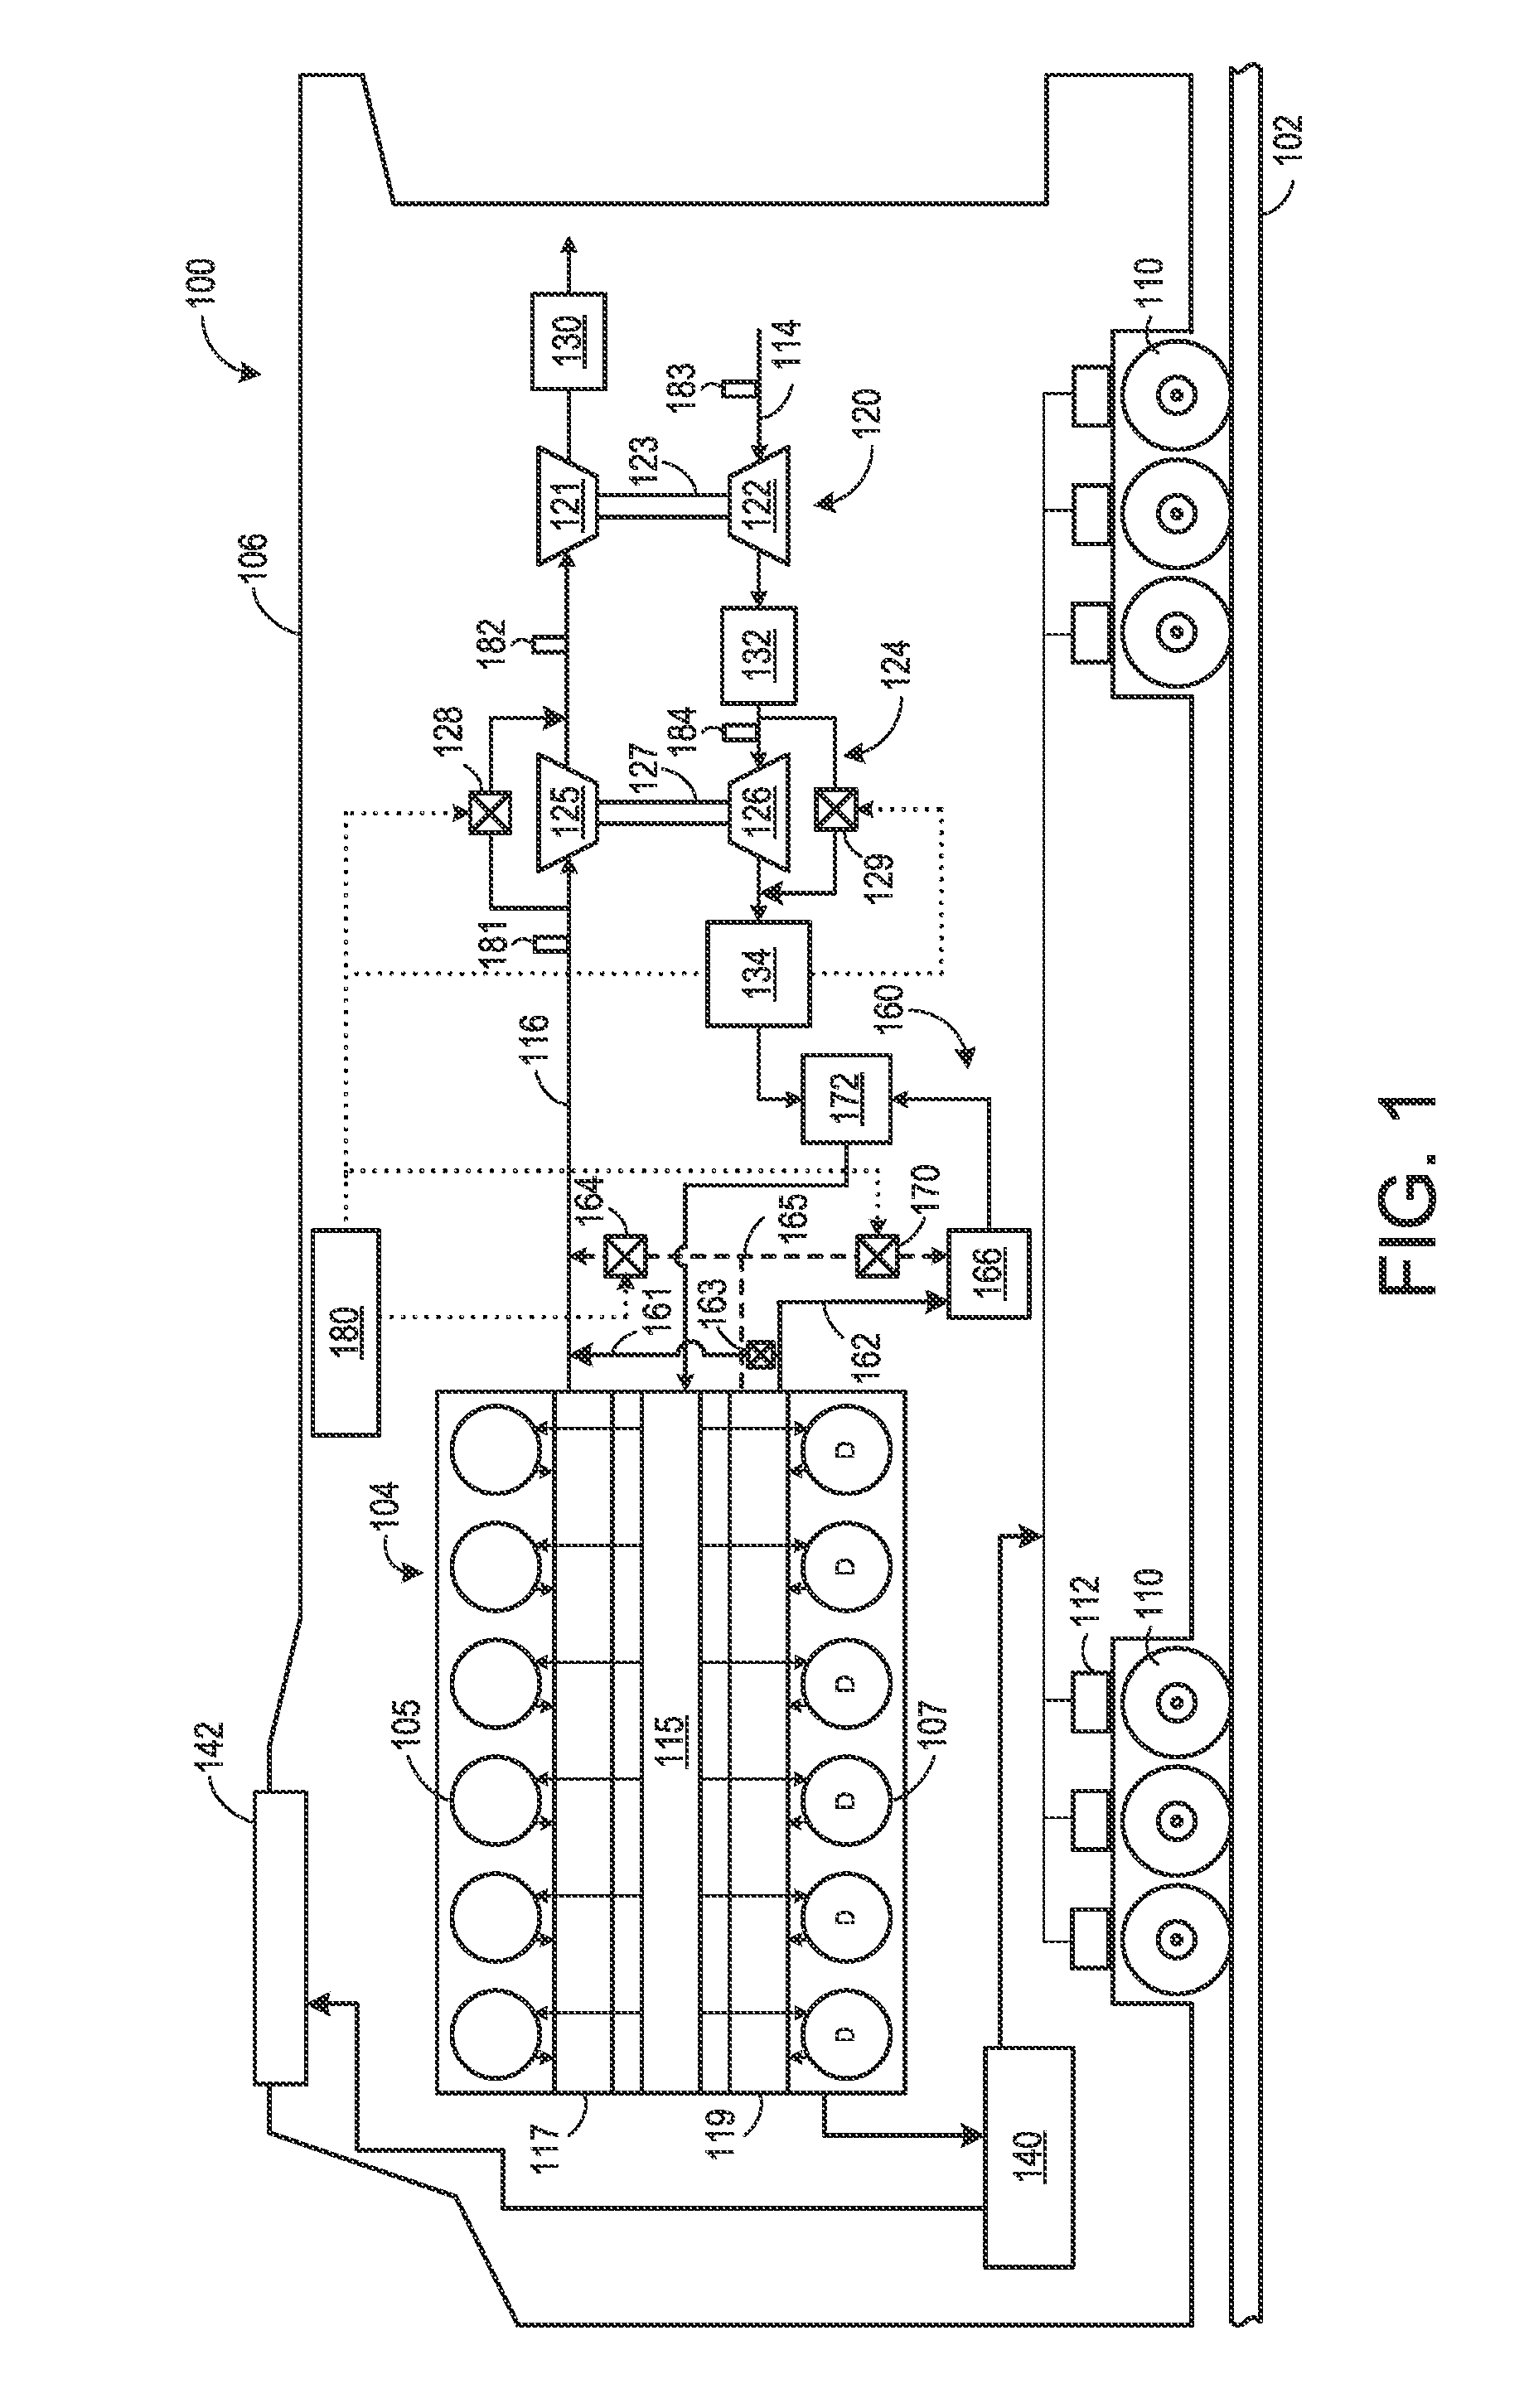 Method and systems for a multi-fuel engine